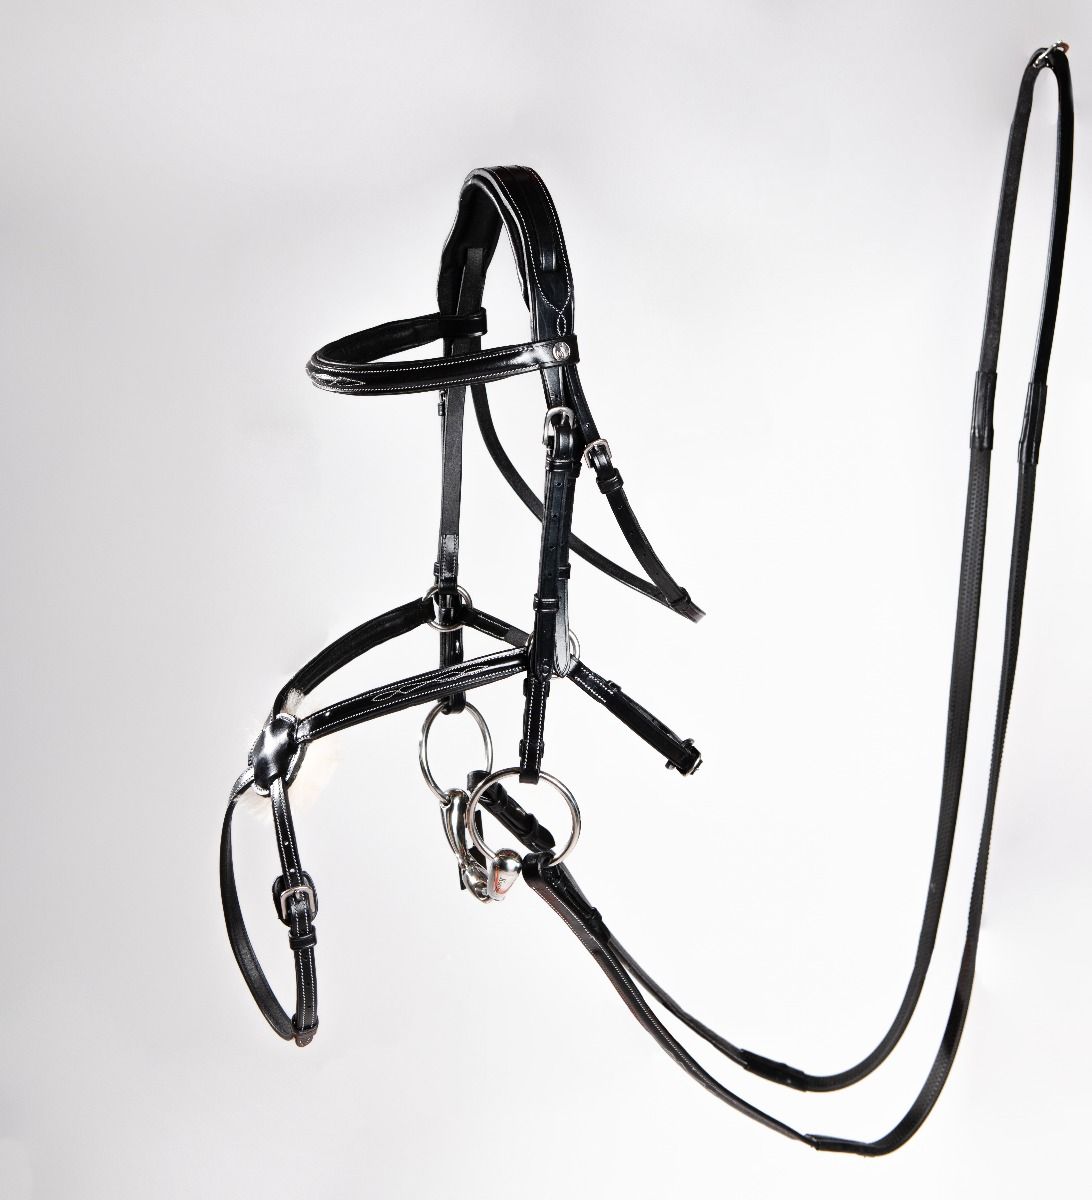 Turfmasters Mexican Bridle